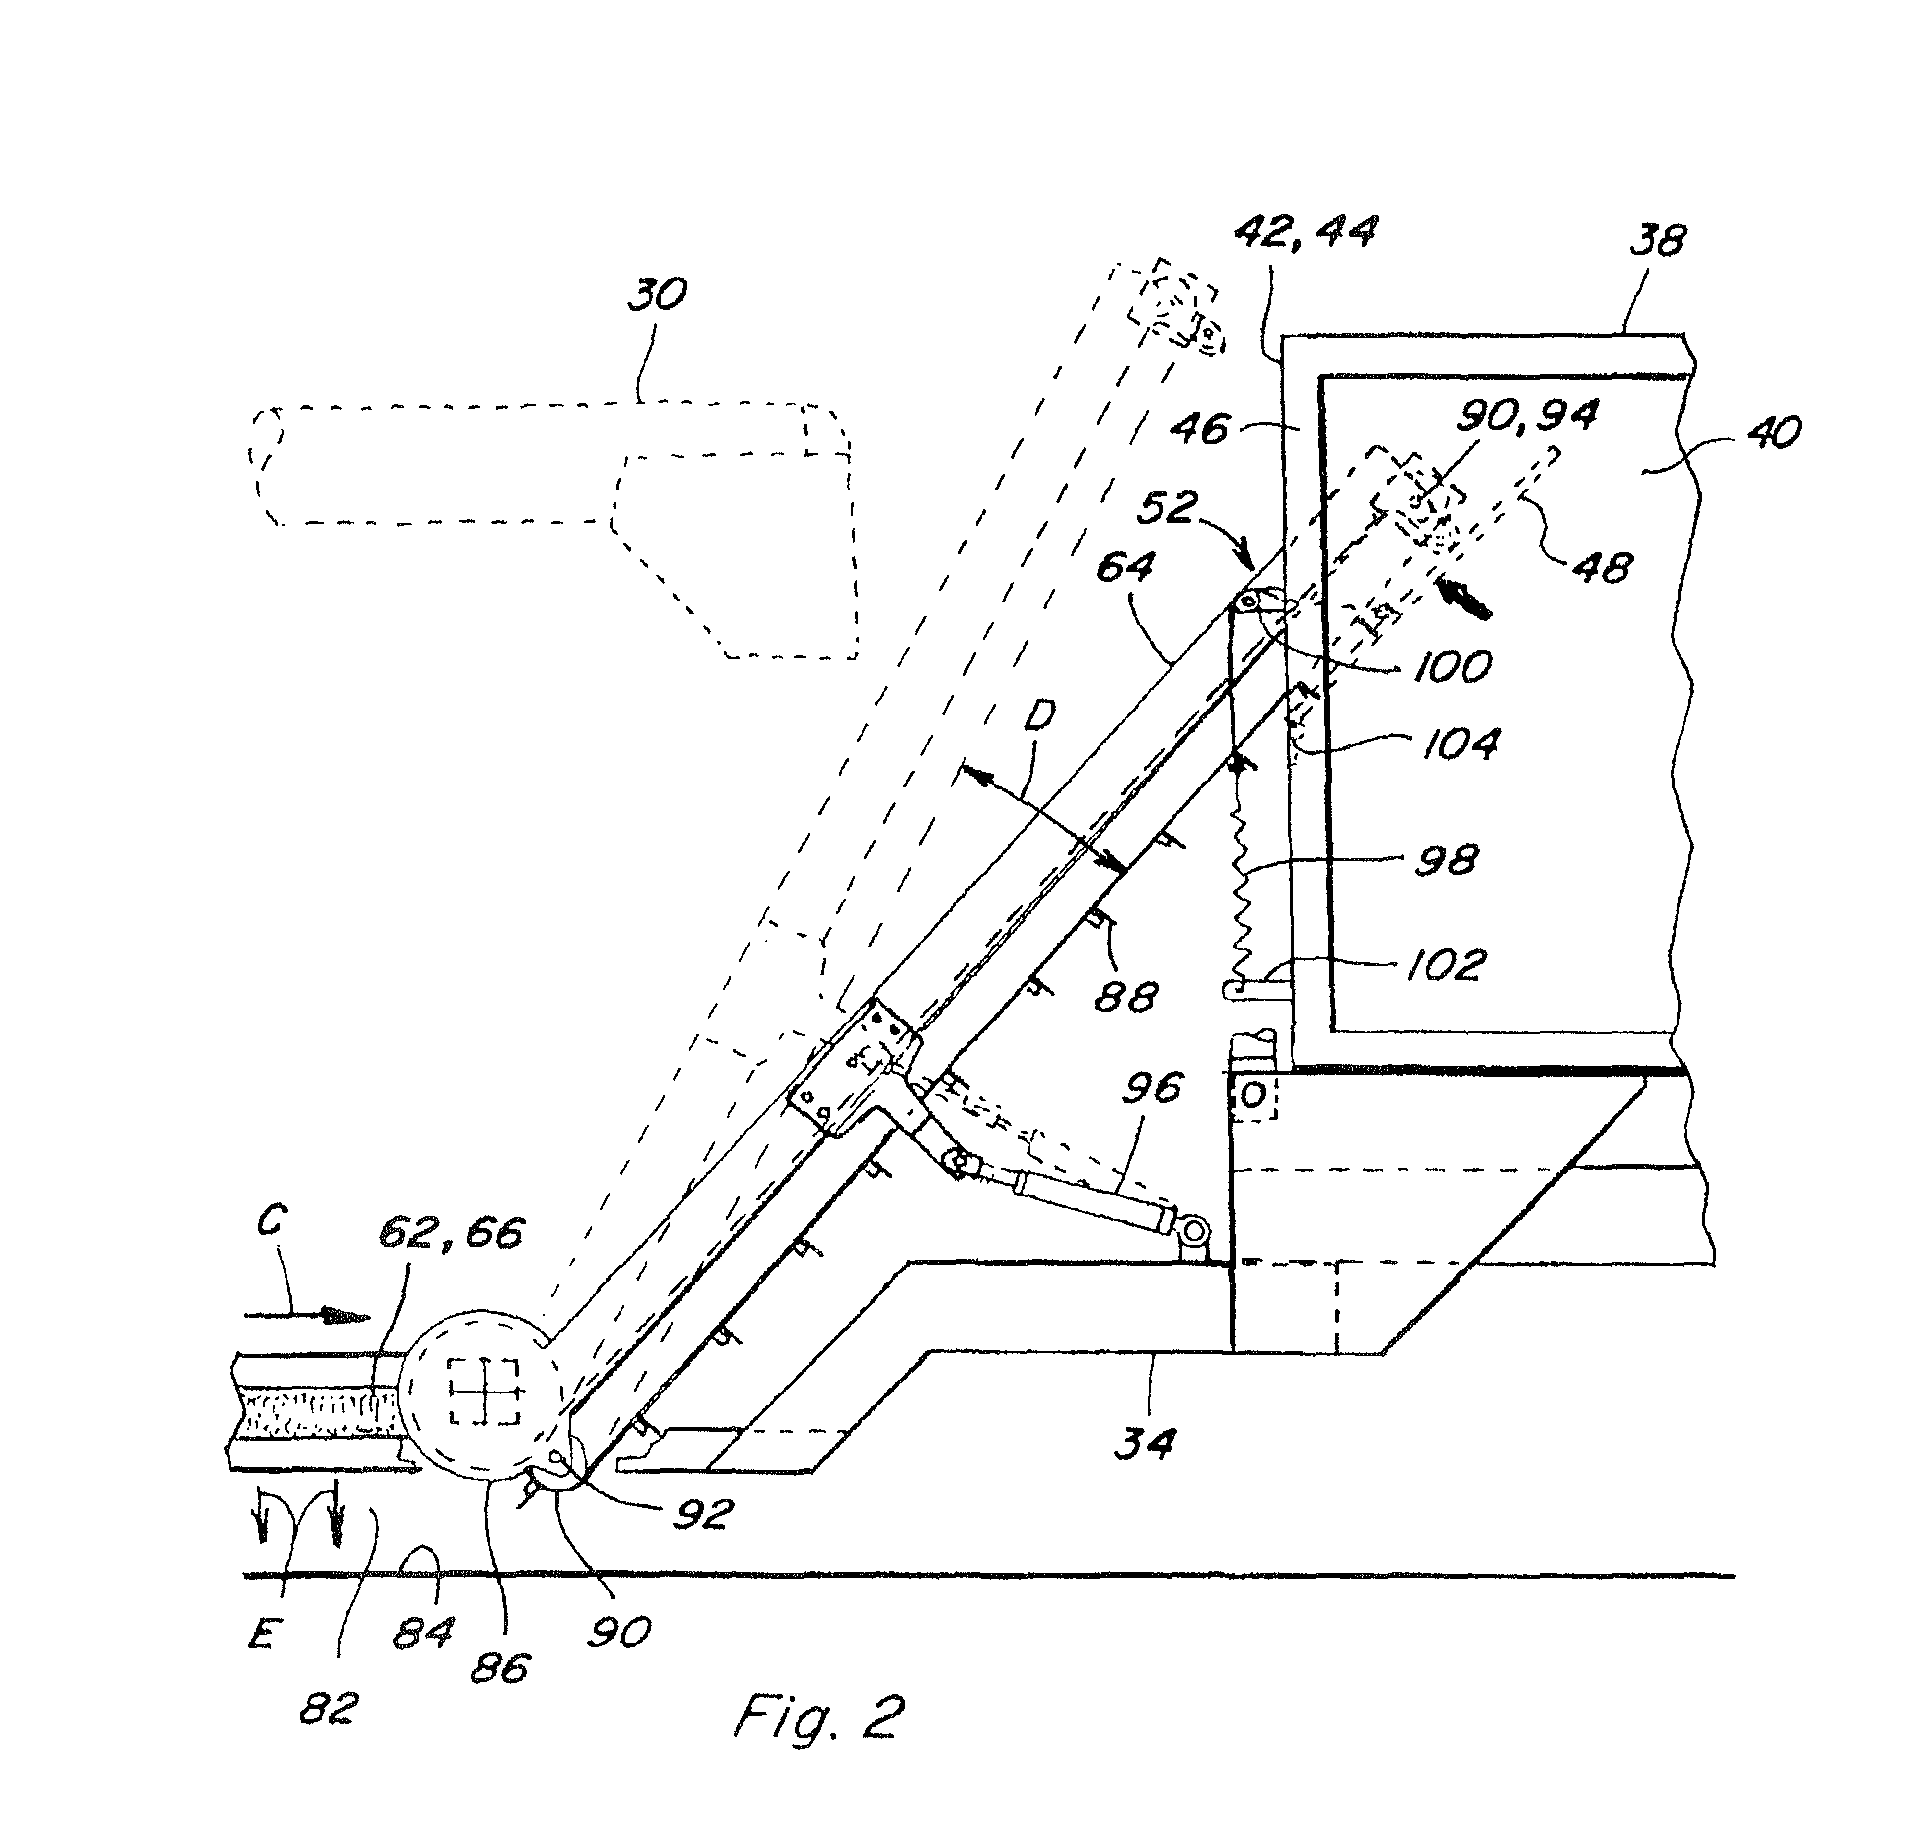 Corn cob collection device with stowable conveyor system having positive de-husking capability